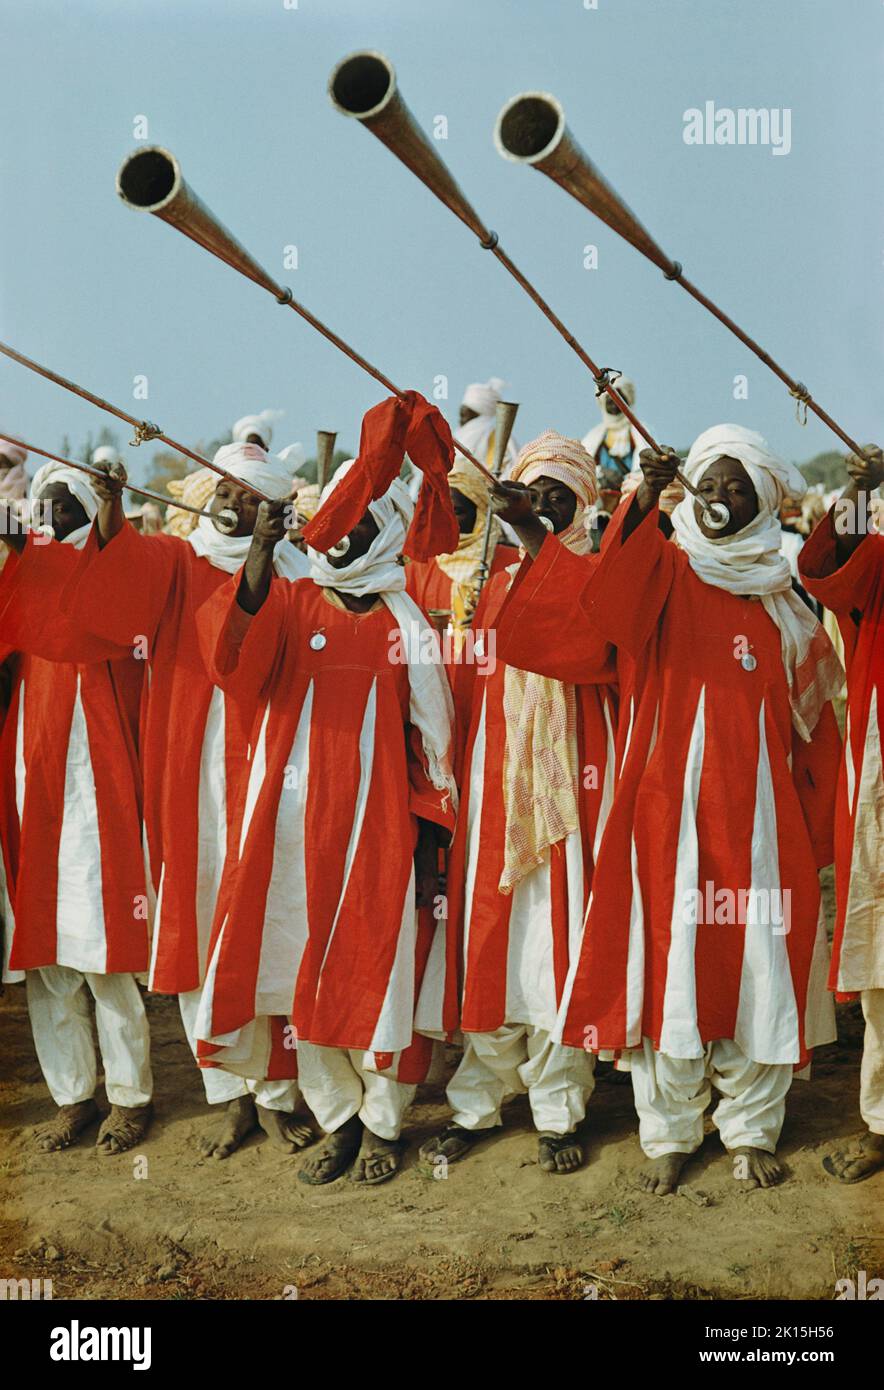 Retainers of the Etsu (or leader) of the Nupe people in Niger, blowing a fanfare on bronze trumpets called kakati. Stock Photo